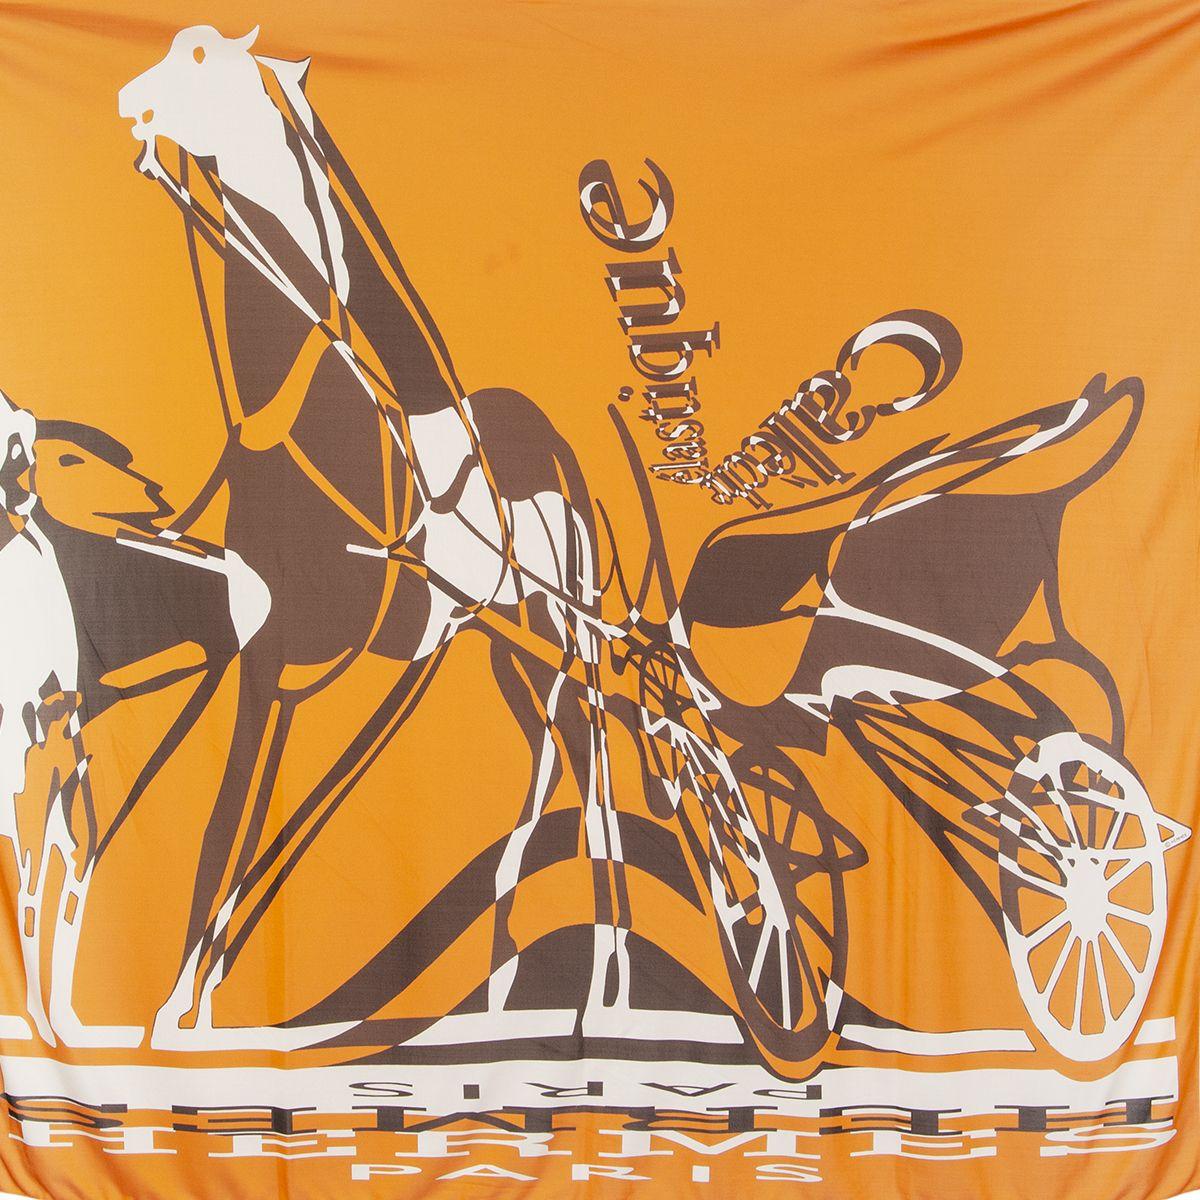 Hermes 'Caleche Elastique 90' scarf by Bali Barret in orange silk jersey (100%) with contrasting white hem details in brown and white. Has been worn and is in excellent condition.

Width 90cm (35.1in)
Height 90cm (35.1in)
